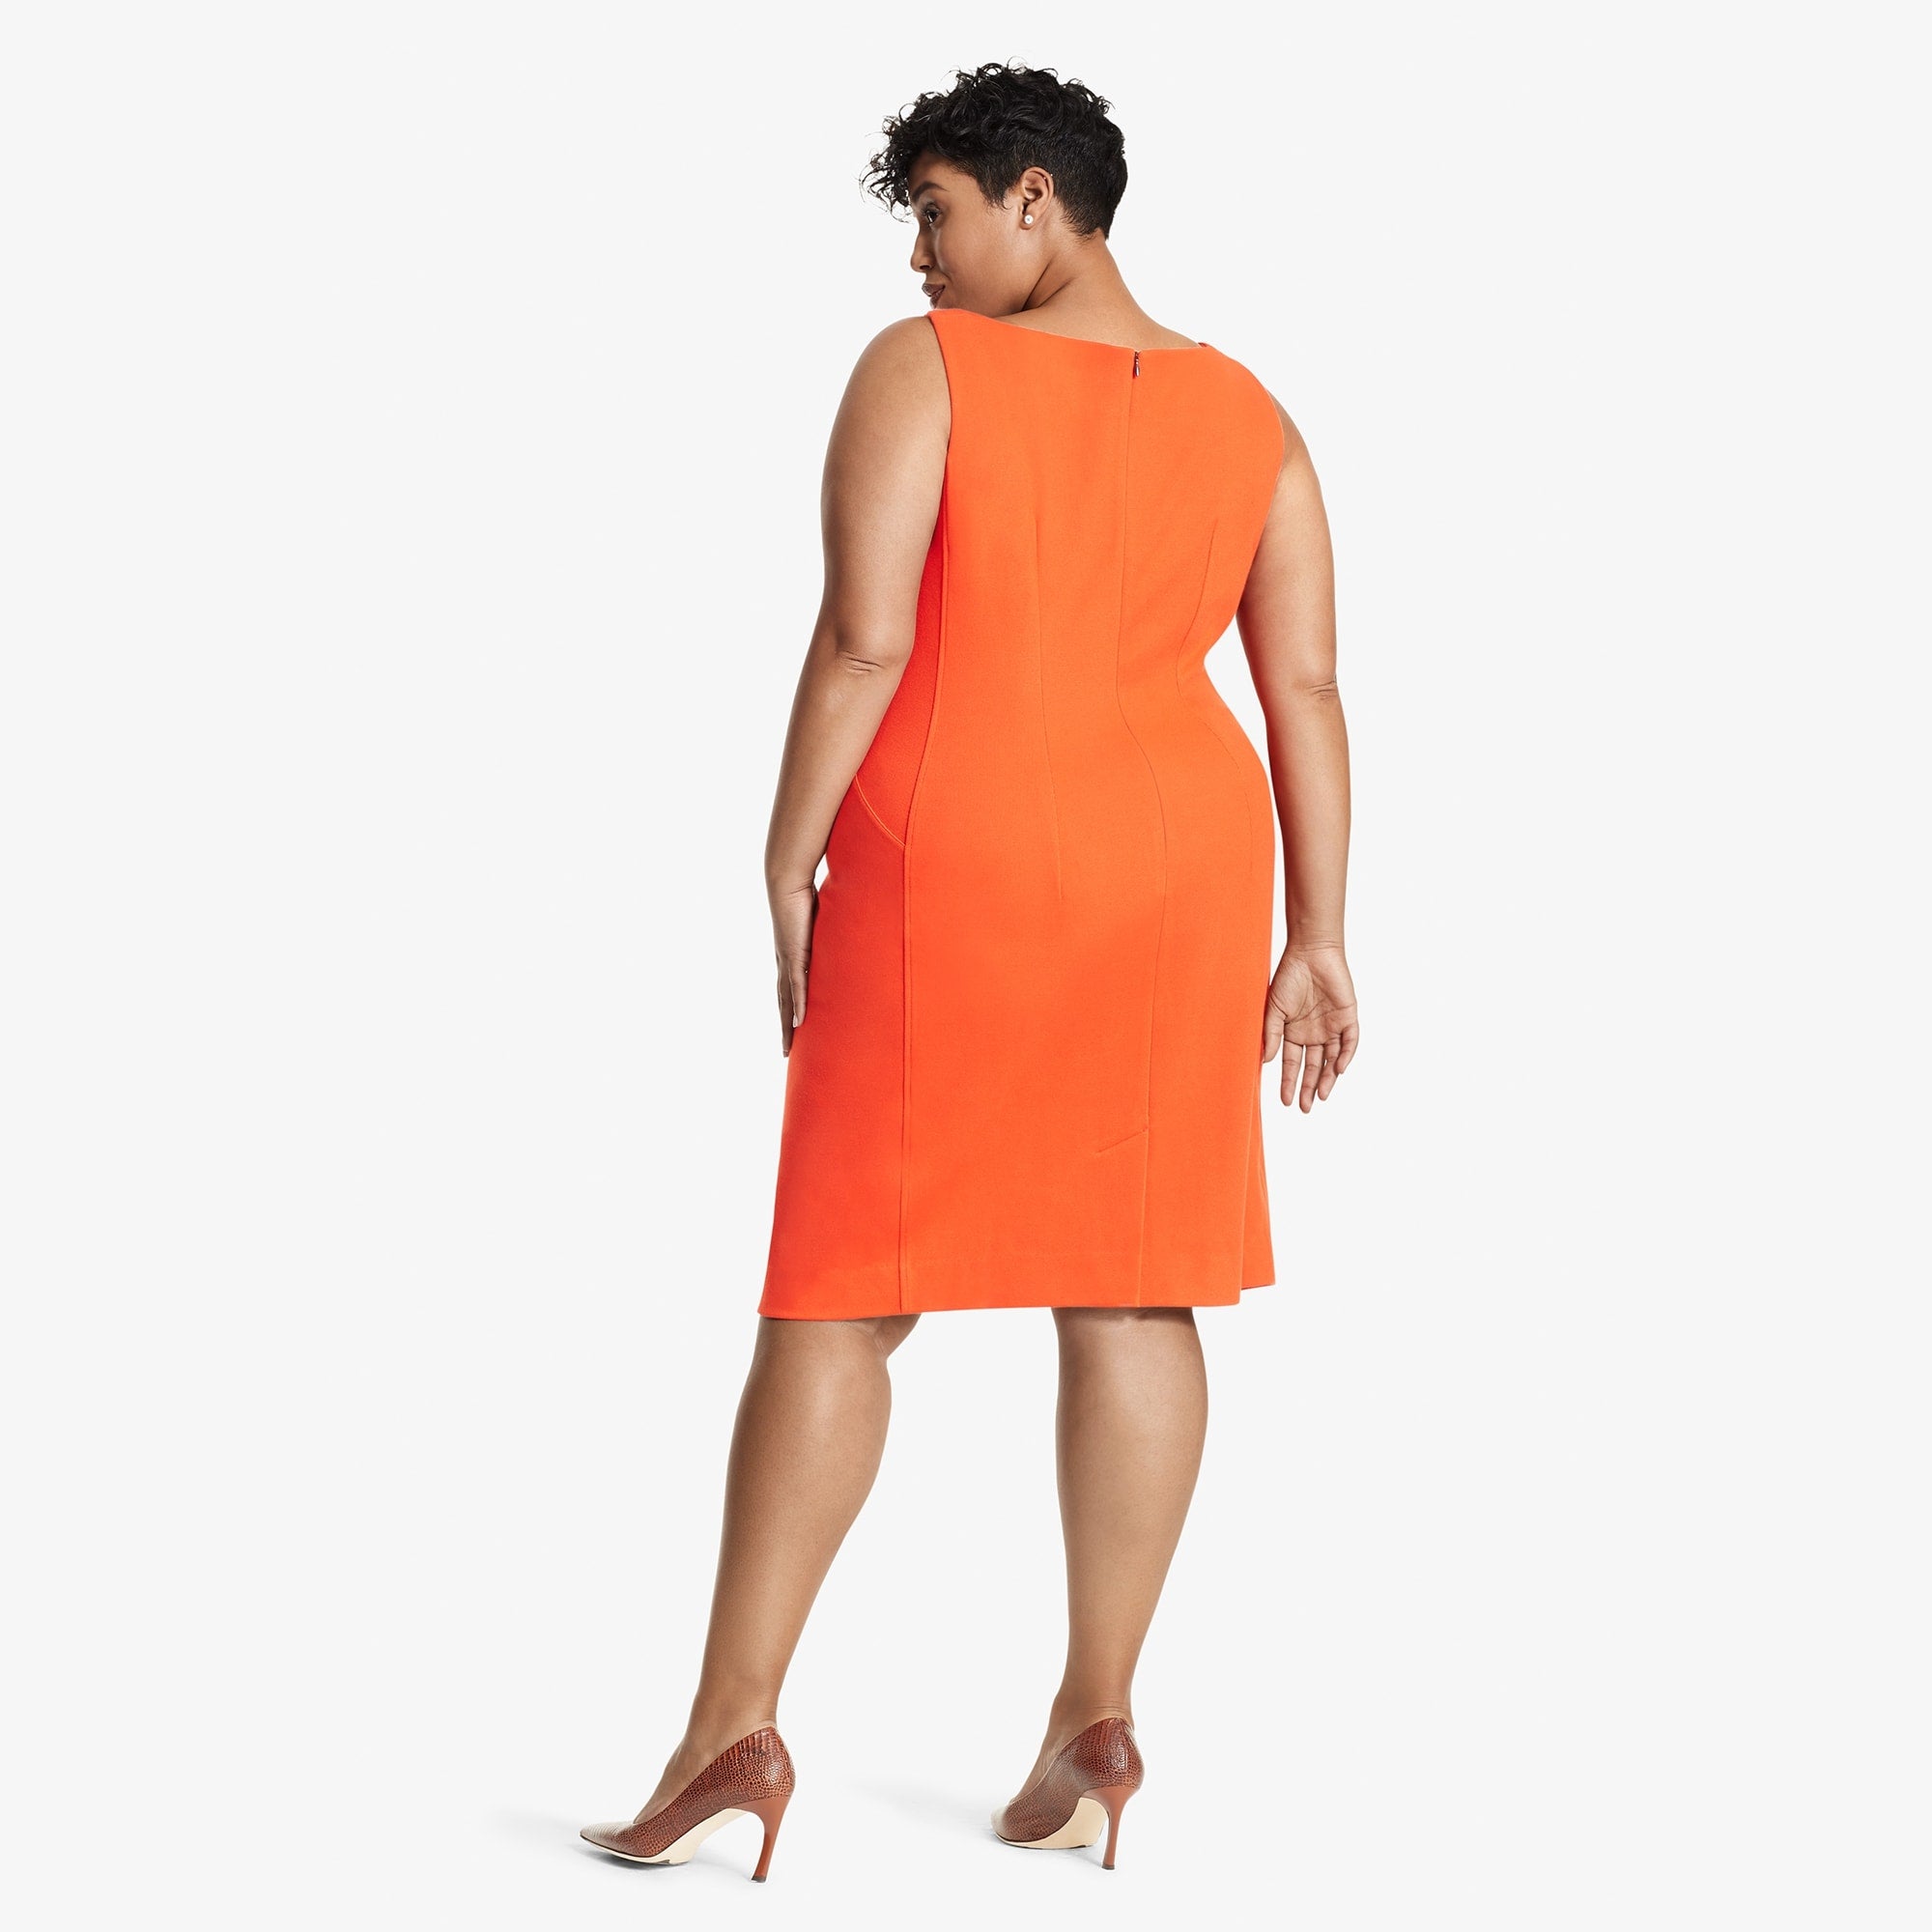 Back image of a woman standing wearing the Lydia dress textured ponte in Tangerine